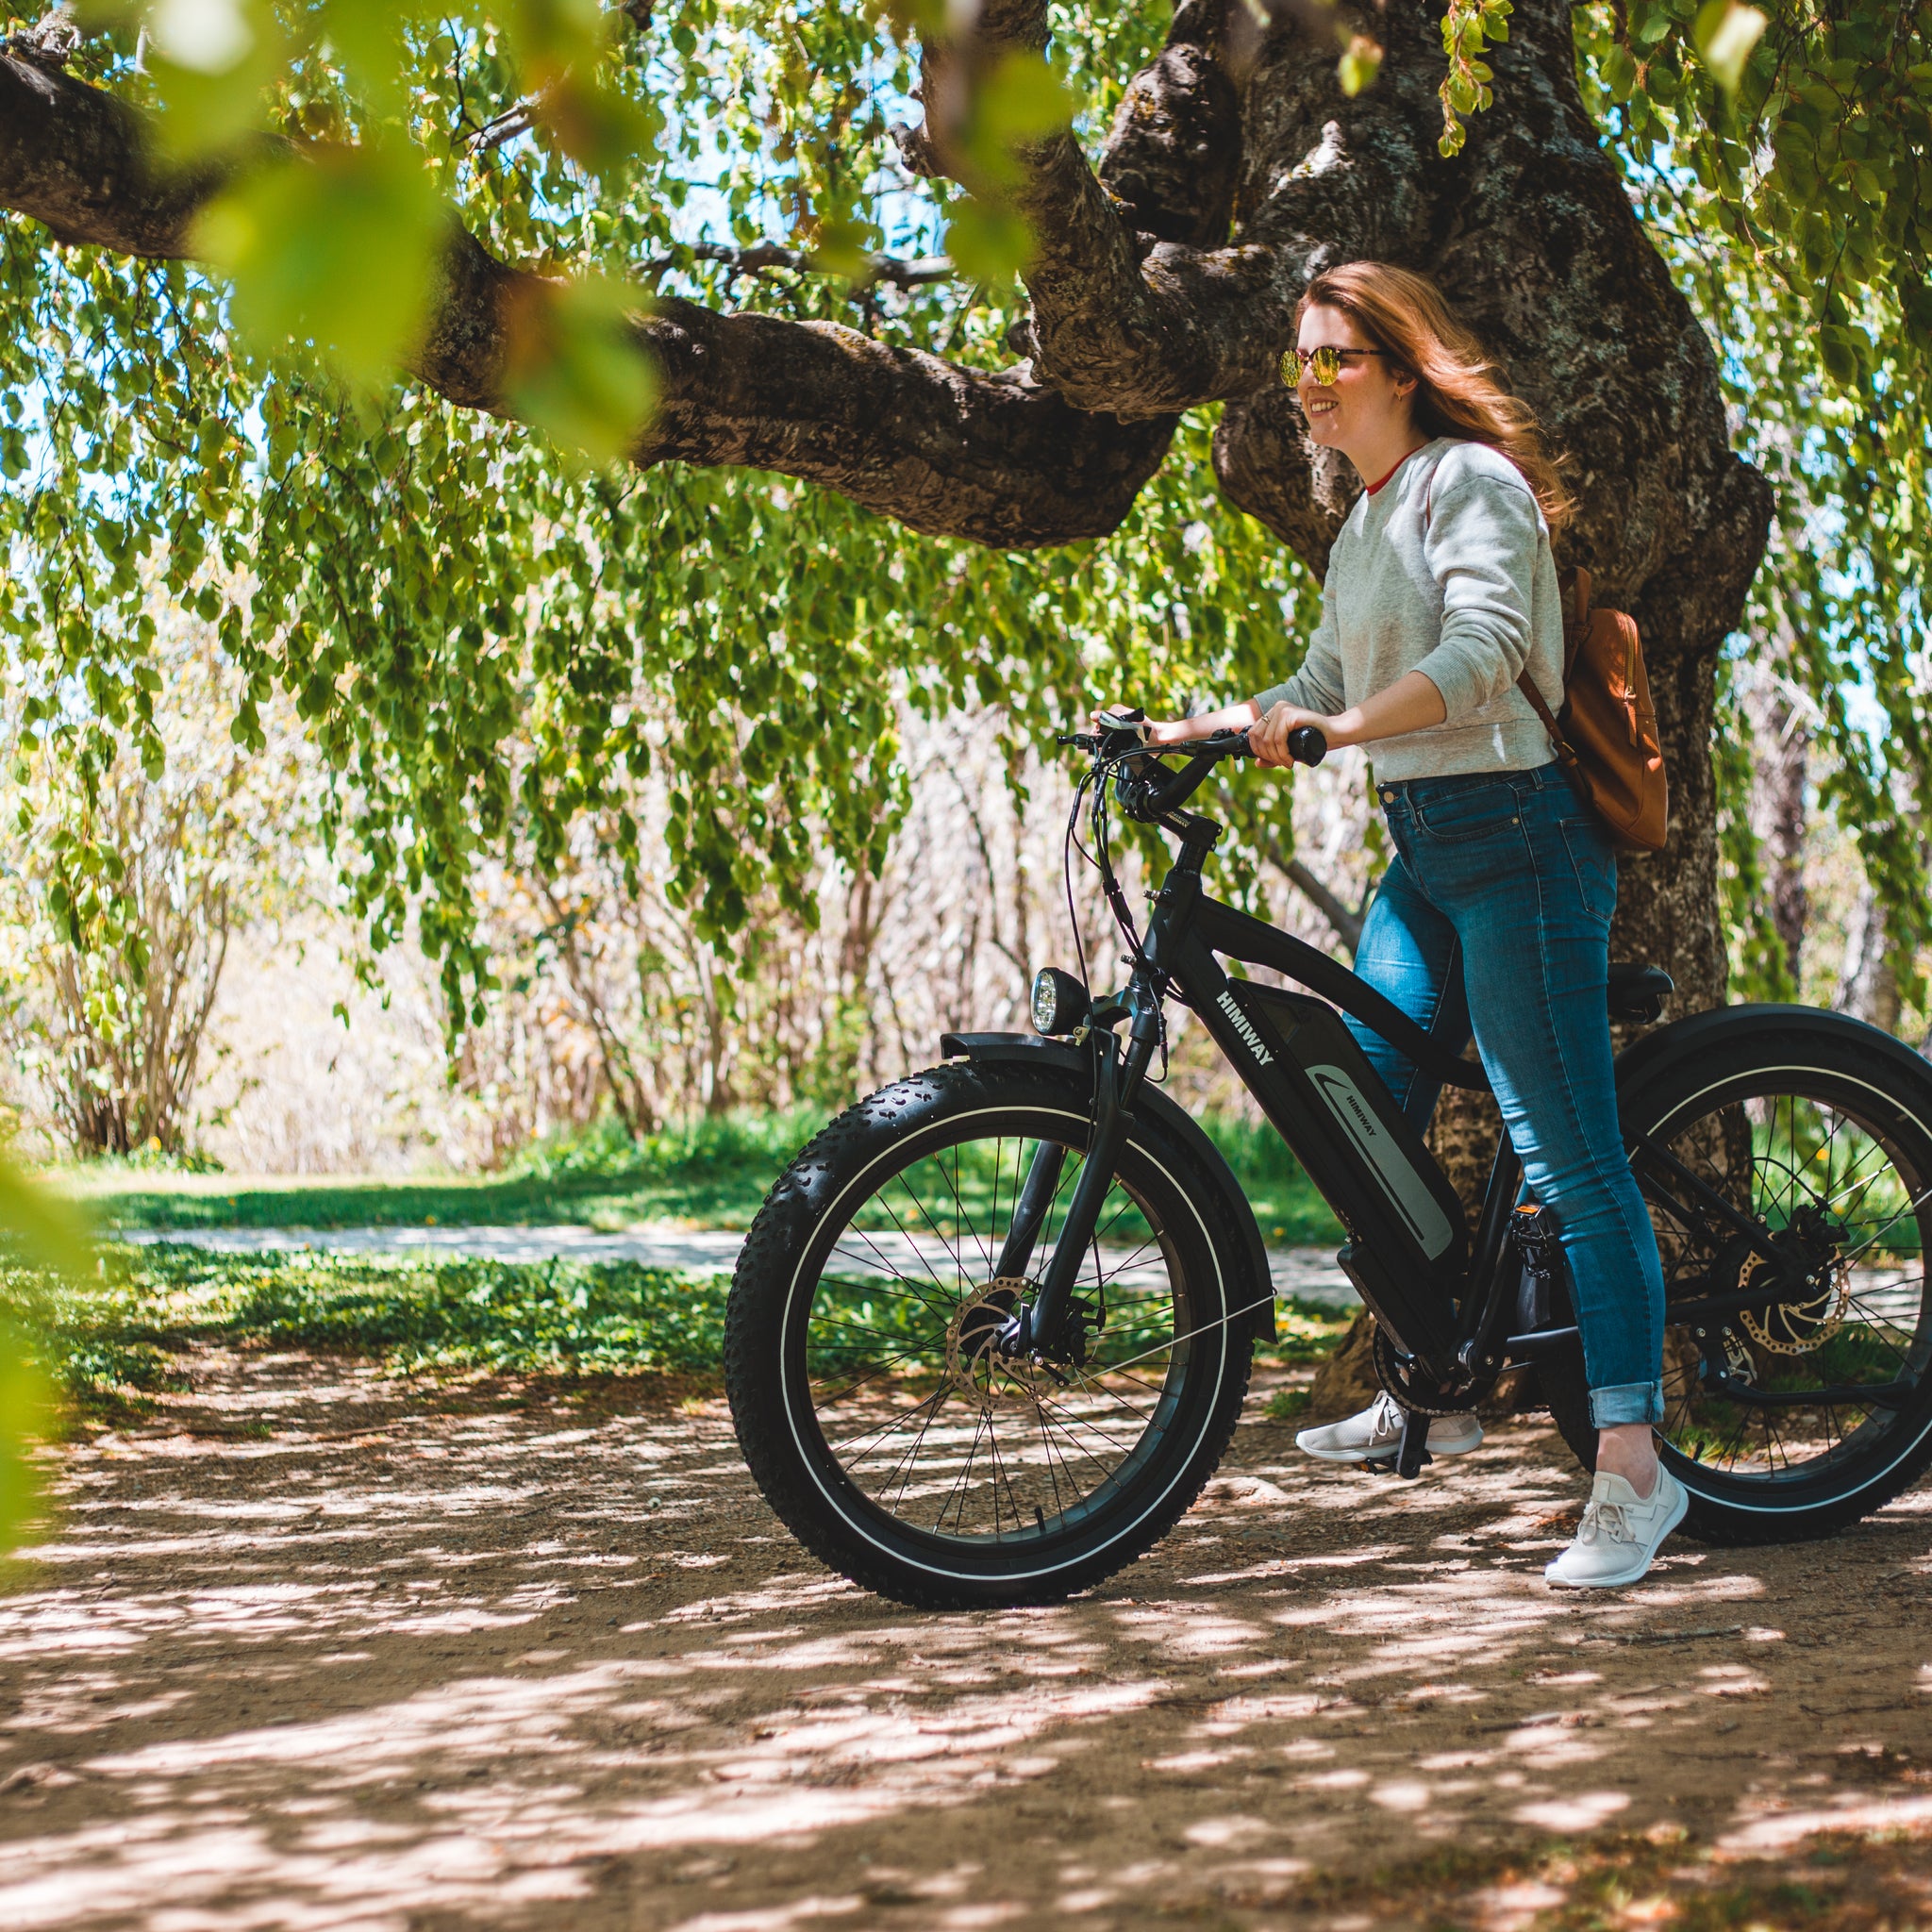 6 Tips for Maintaining Proper Road Bicycle Posture on Your E-Bike